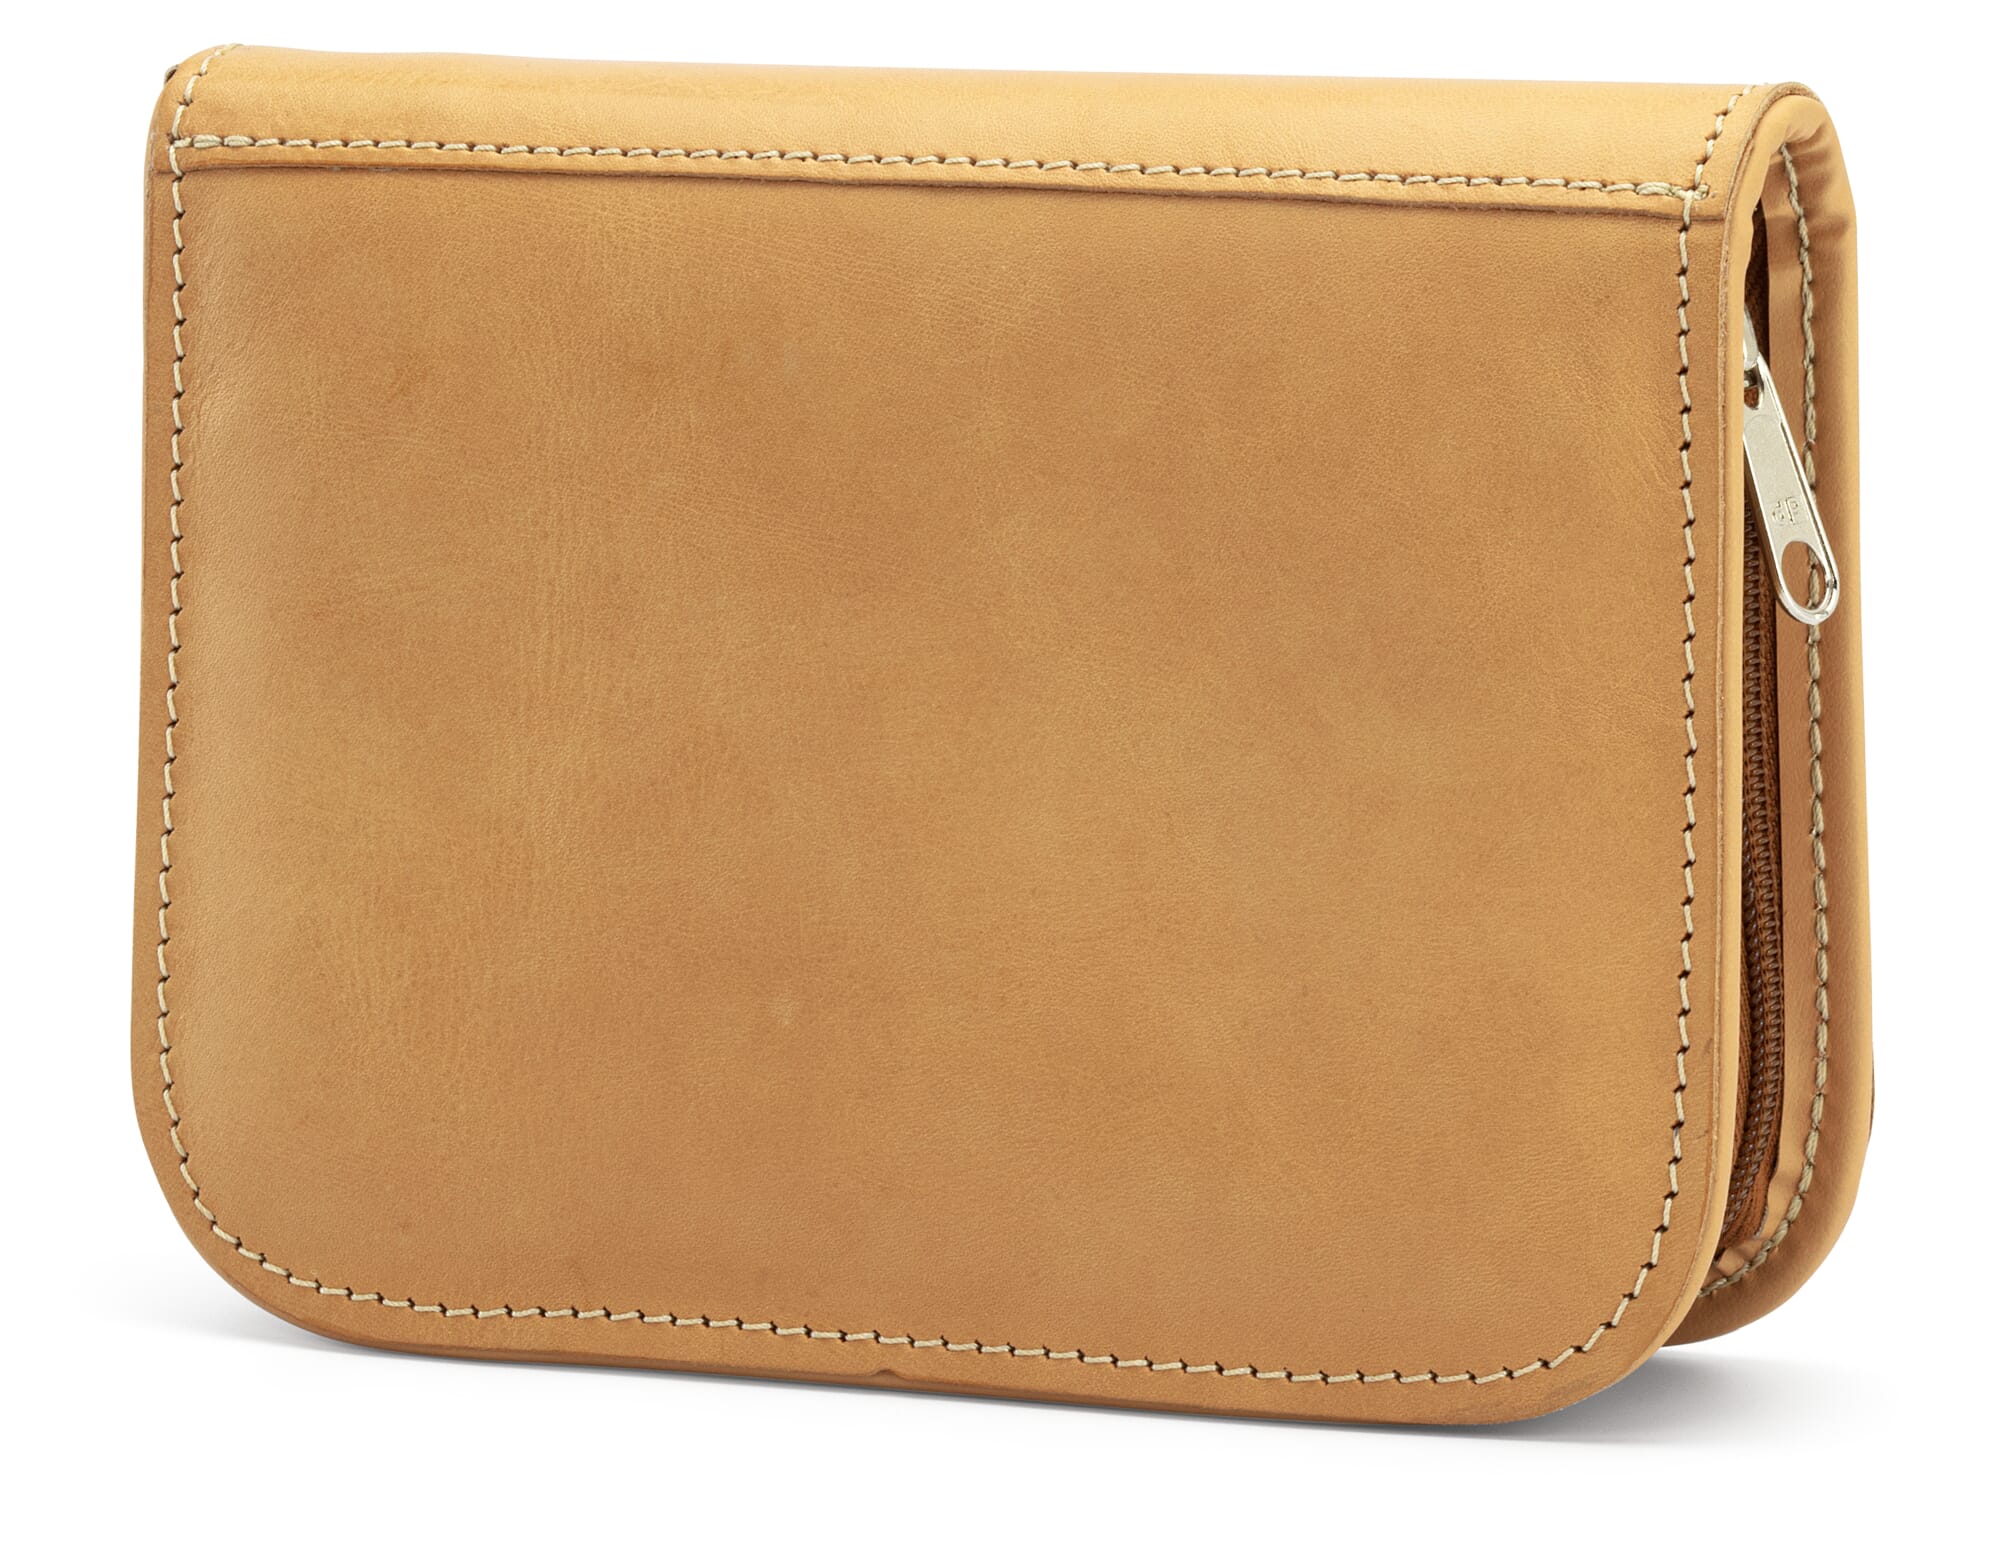 Pencil Case 097 - - Pencilcase in cow leather 097